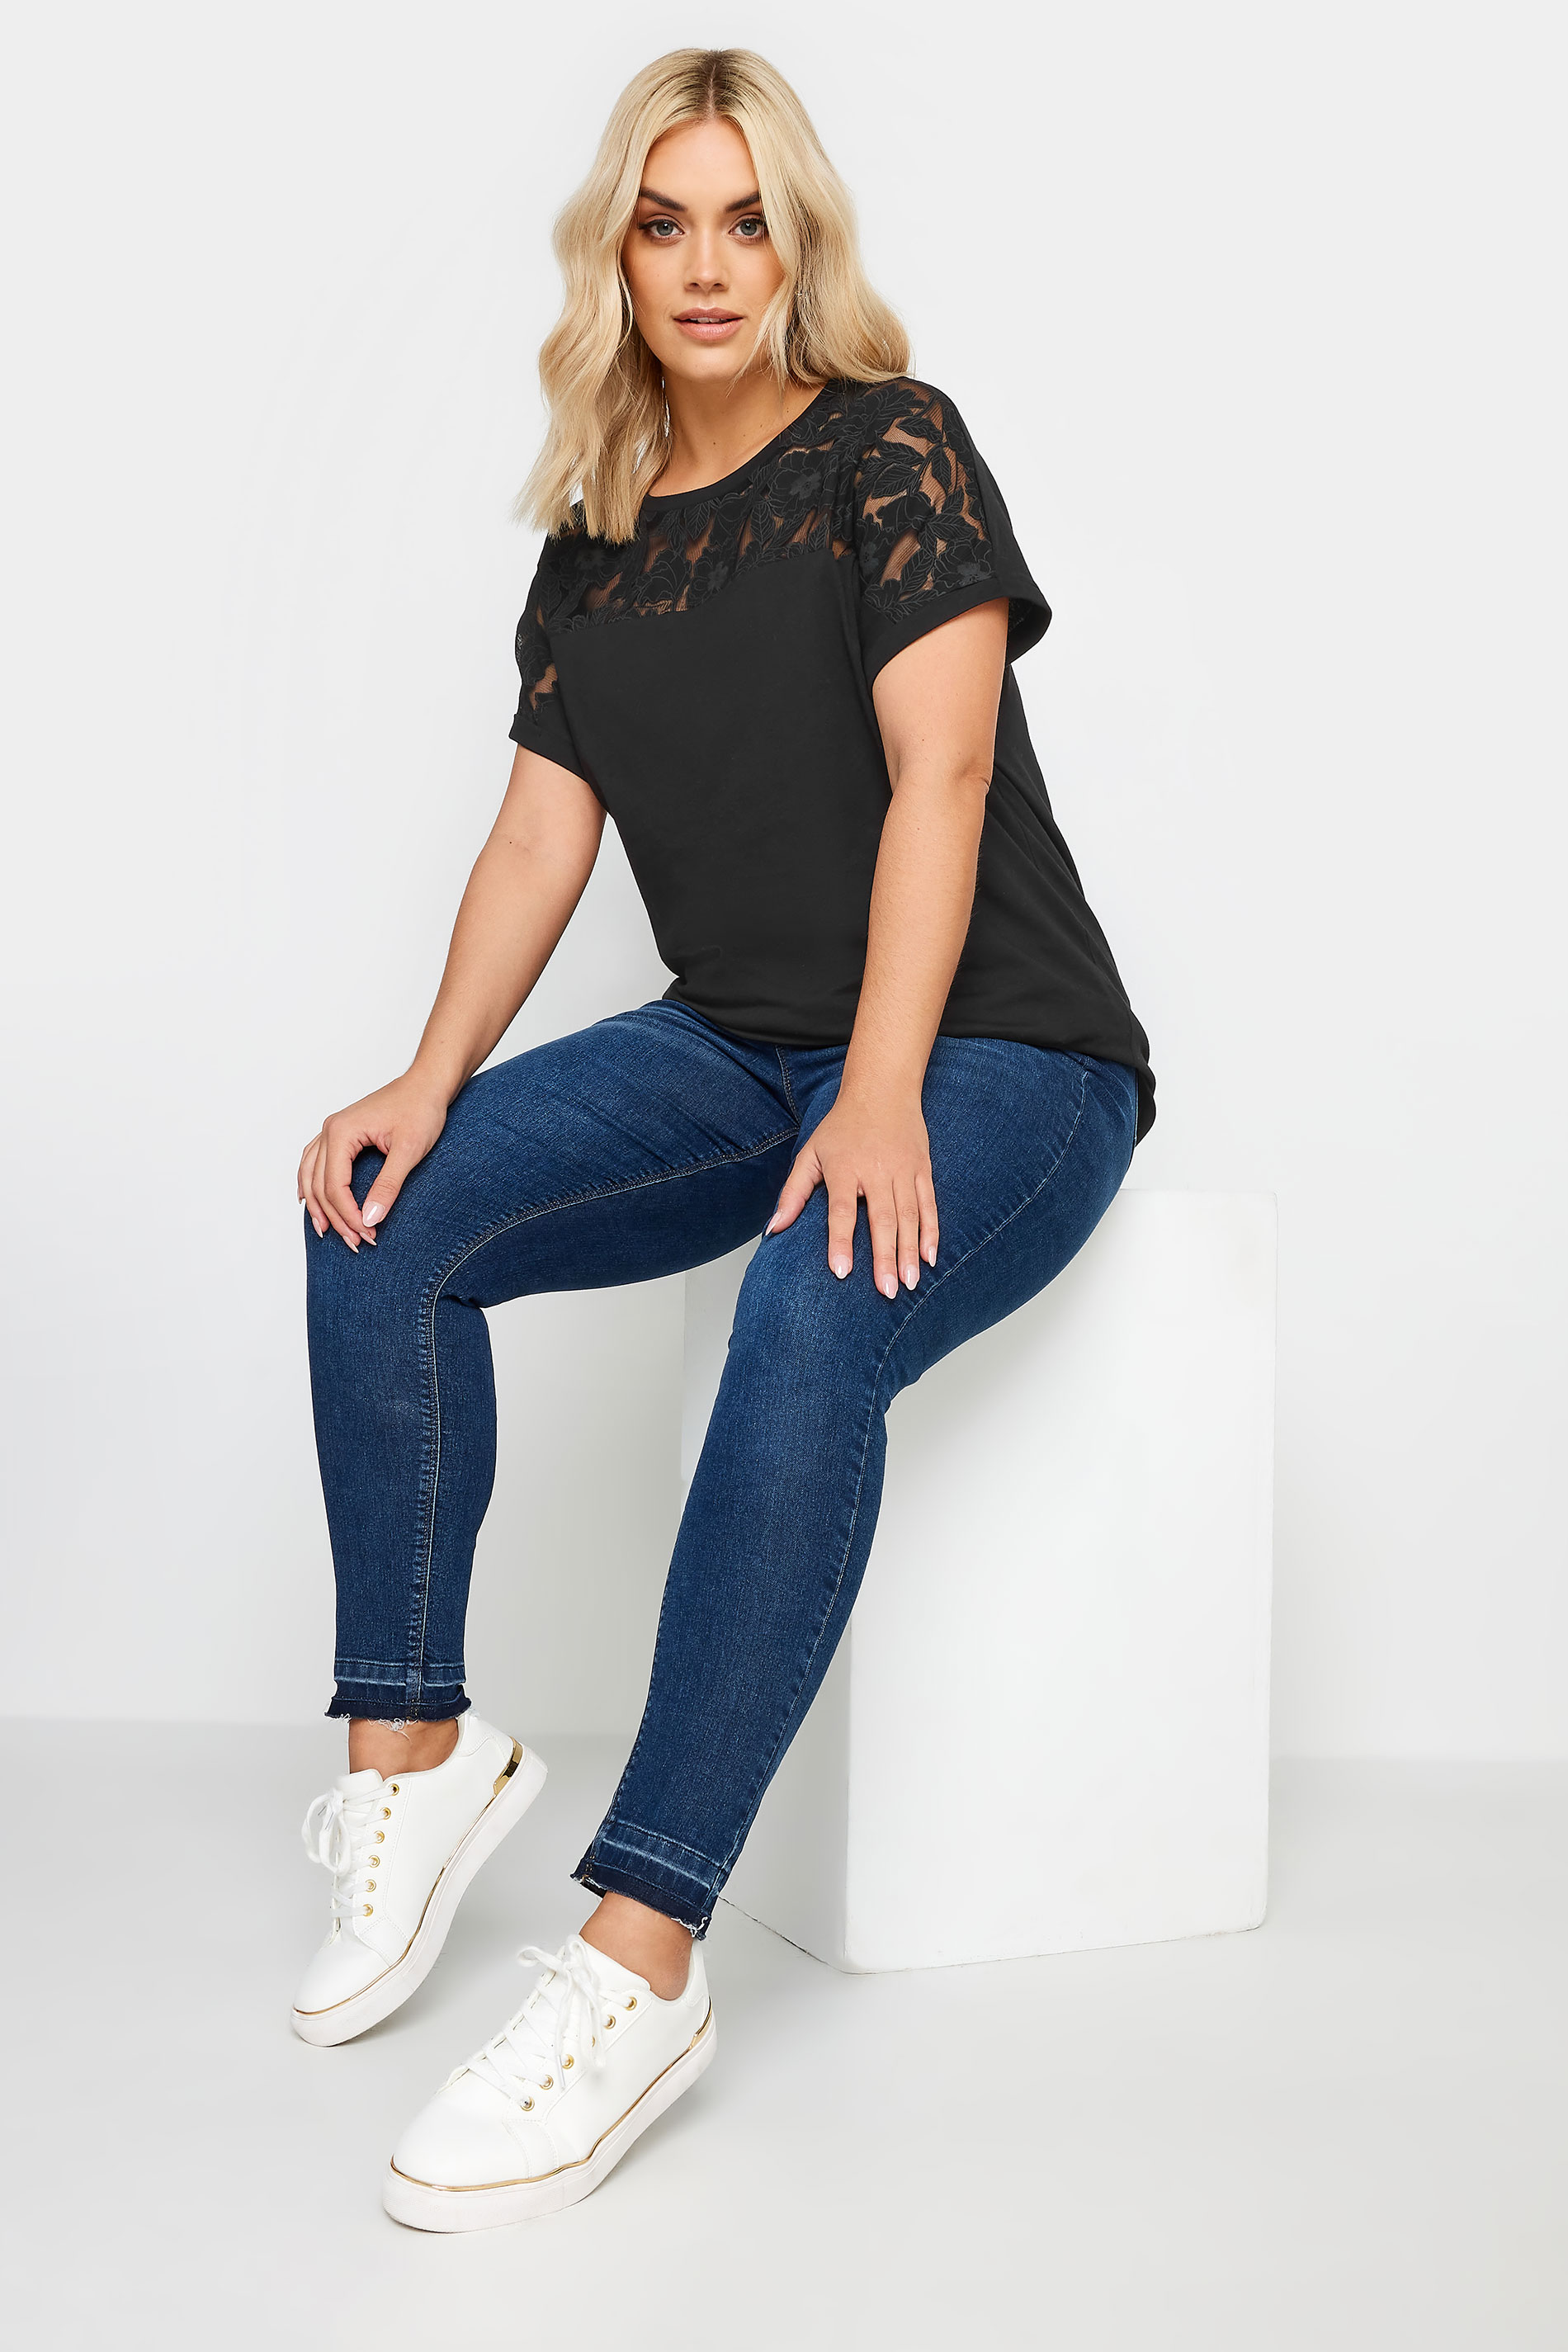 YOURS Plus Size Black Floral Mesh T-Shirt | Yours Clothing 2